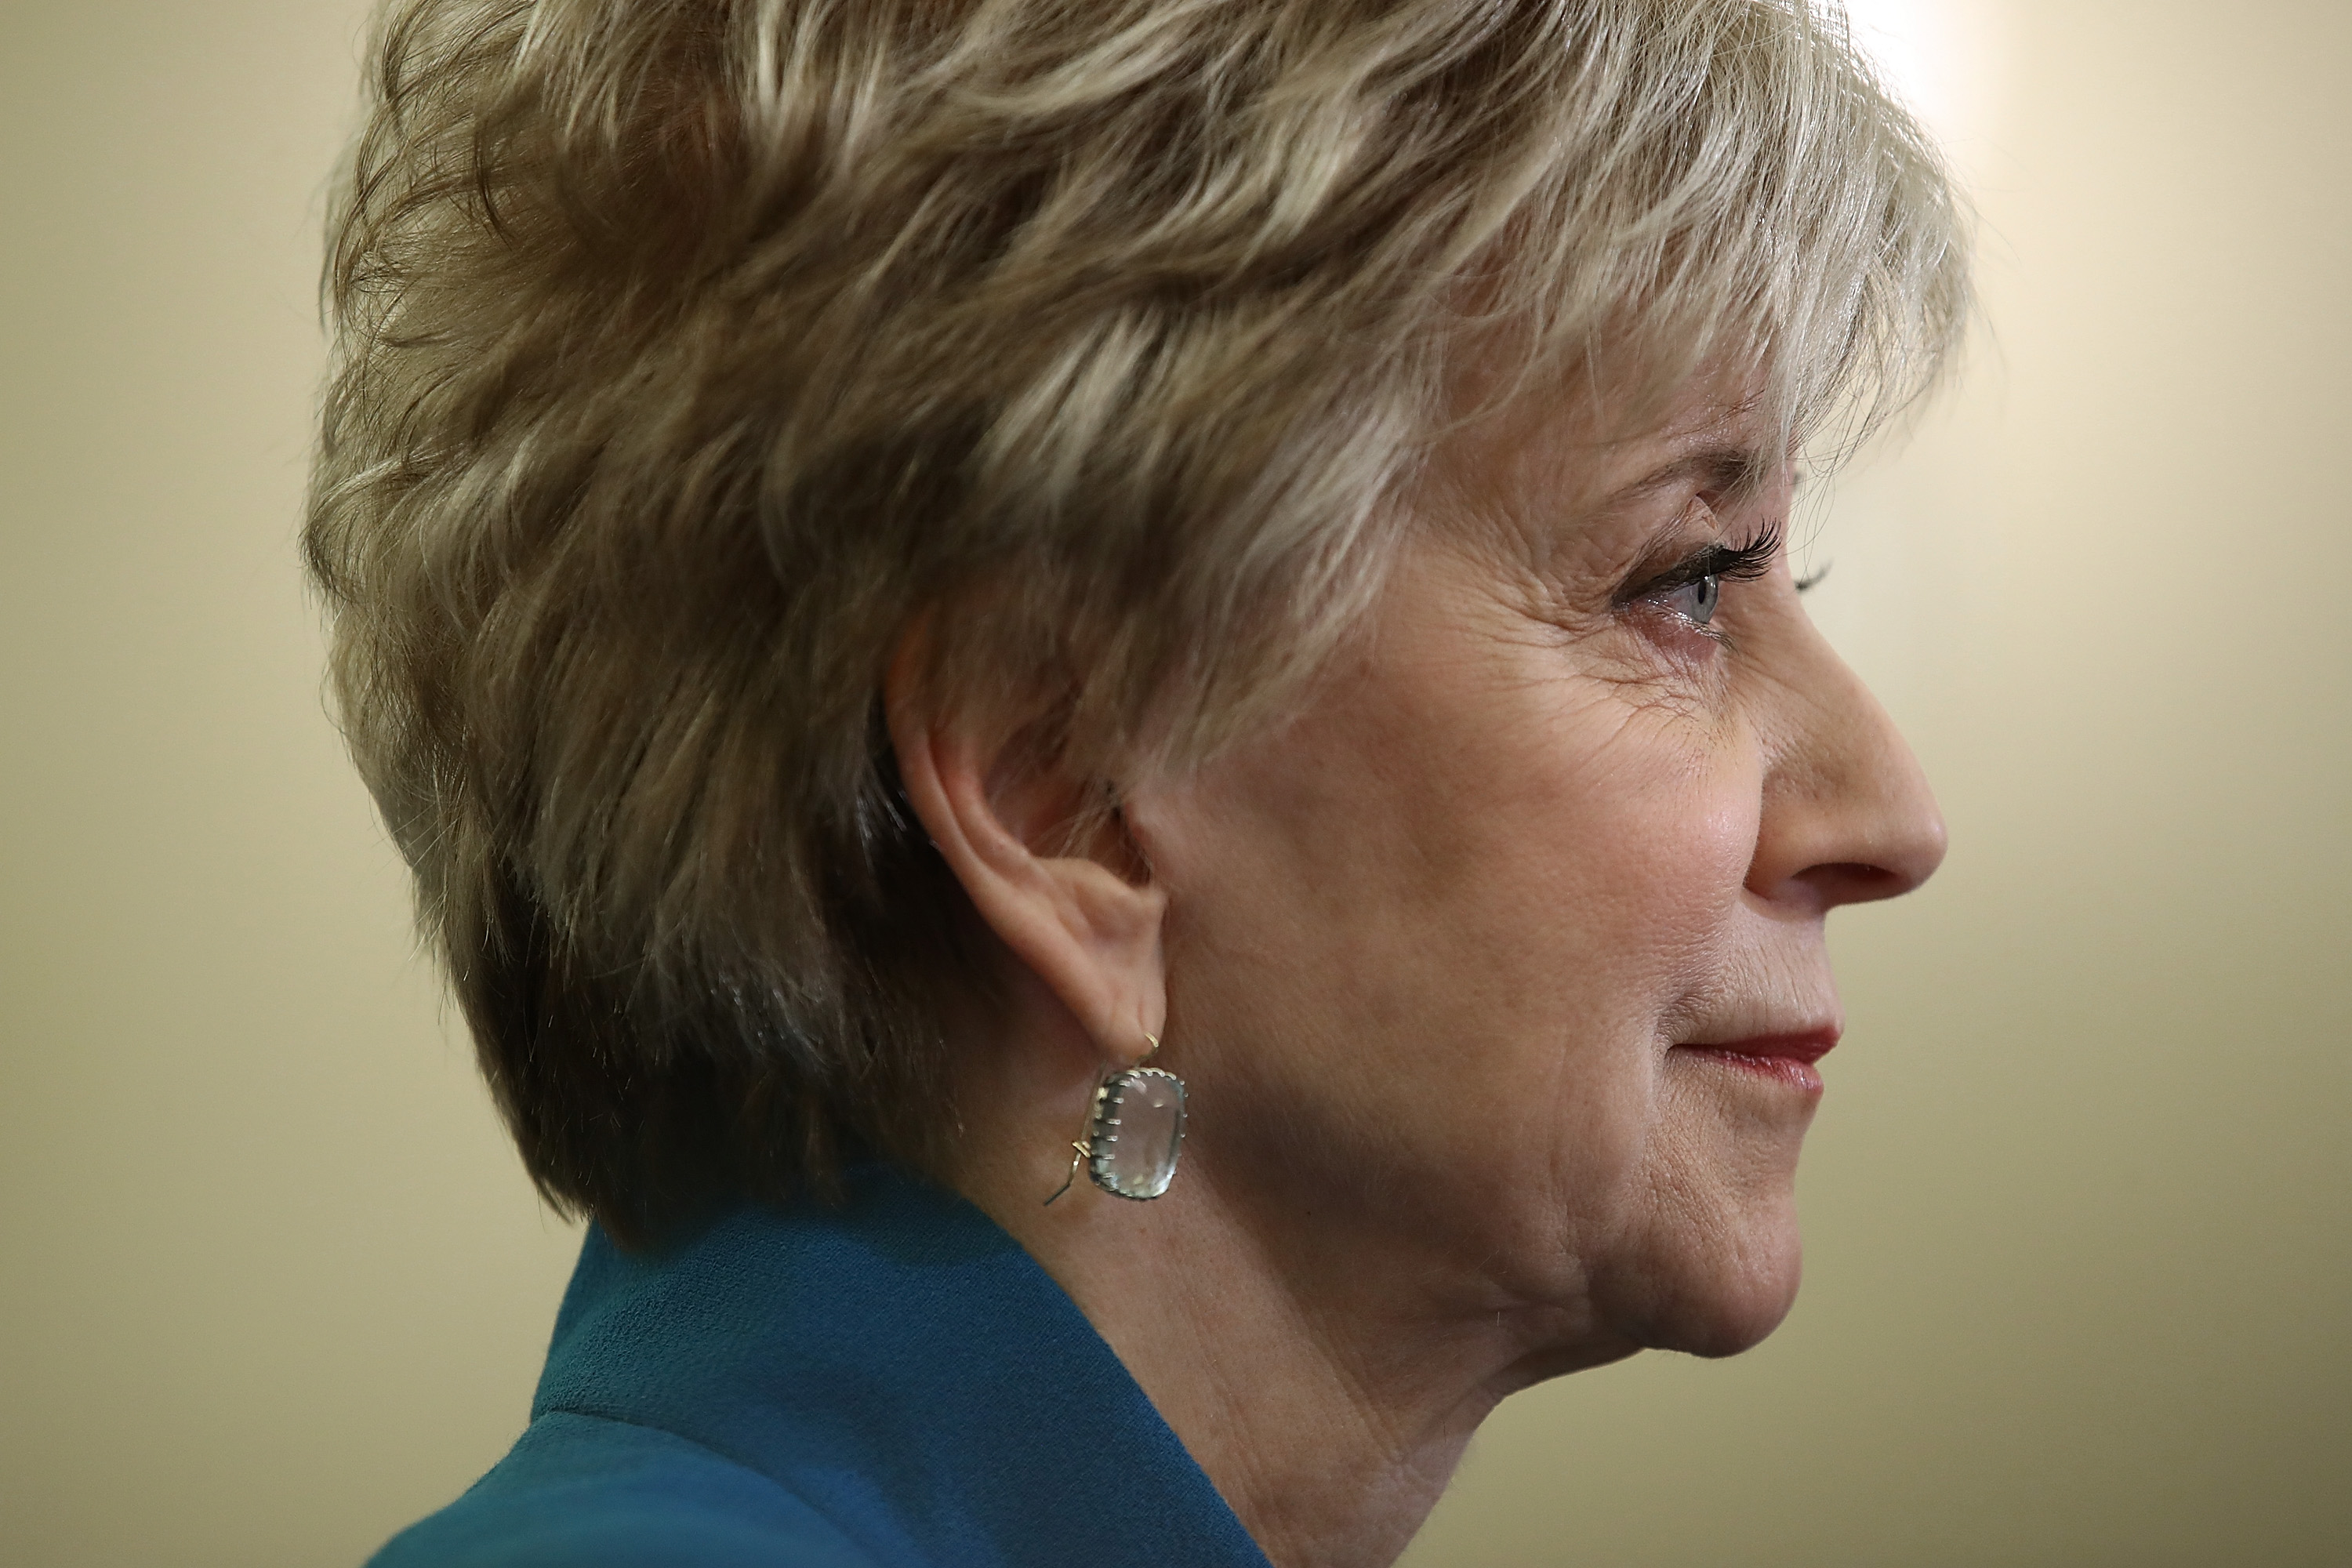 WASHINGTON, DC - JANUARY 24: Linda McMahon, U.S. President Donald Trump's nominee to be administrator of the Small Business Administration testifies before the Senate Small Business and Entrepreneurship Committee January 24, 2017 in Washington, DC. The committee heard testimony on McMahon's nomination to the position. (Photo by Win McNamee/Getty Images)